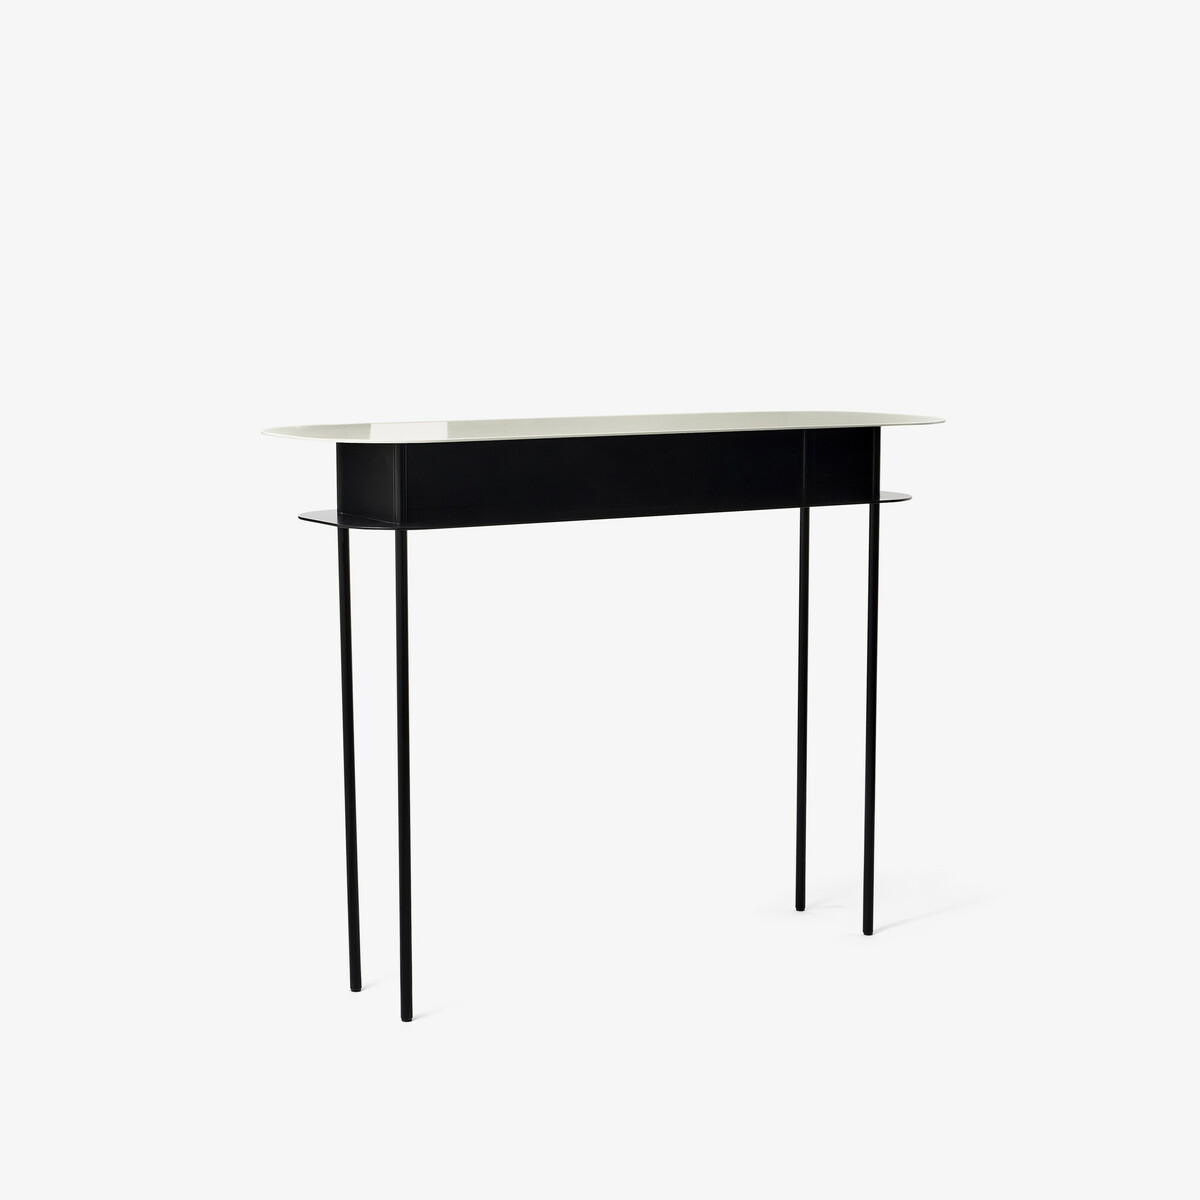 Console Table Tokyo, Off-White/Black - 110 x 40 x 85 cm - Powder coated steel - image 2